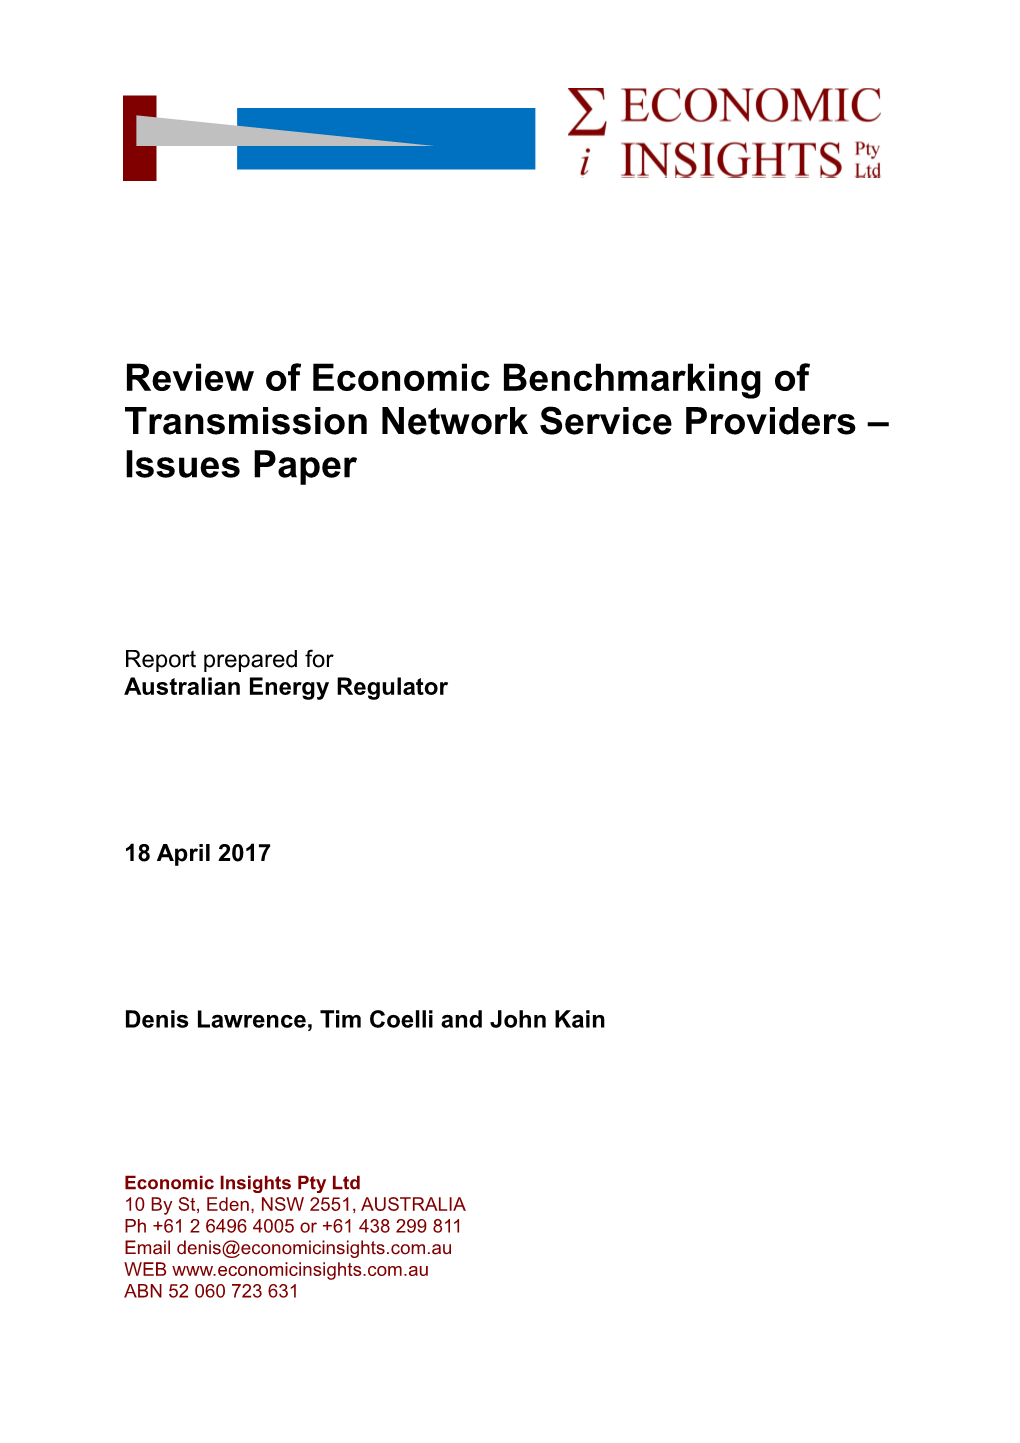 Review of Economic Benchmarking of Transmission Network Service Providers Issues Paper